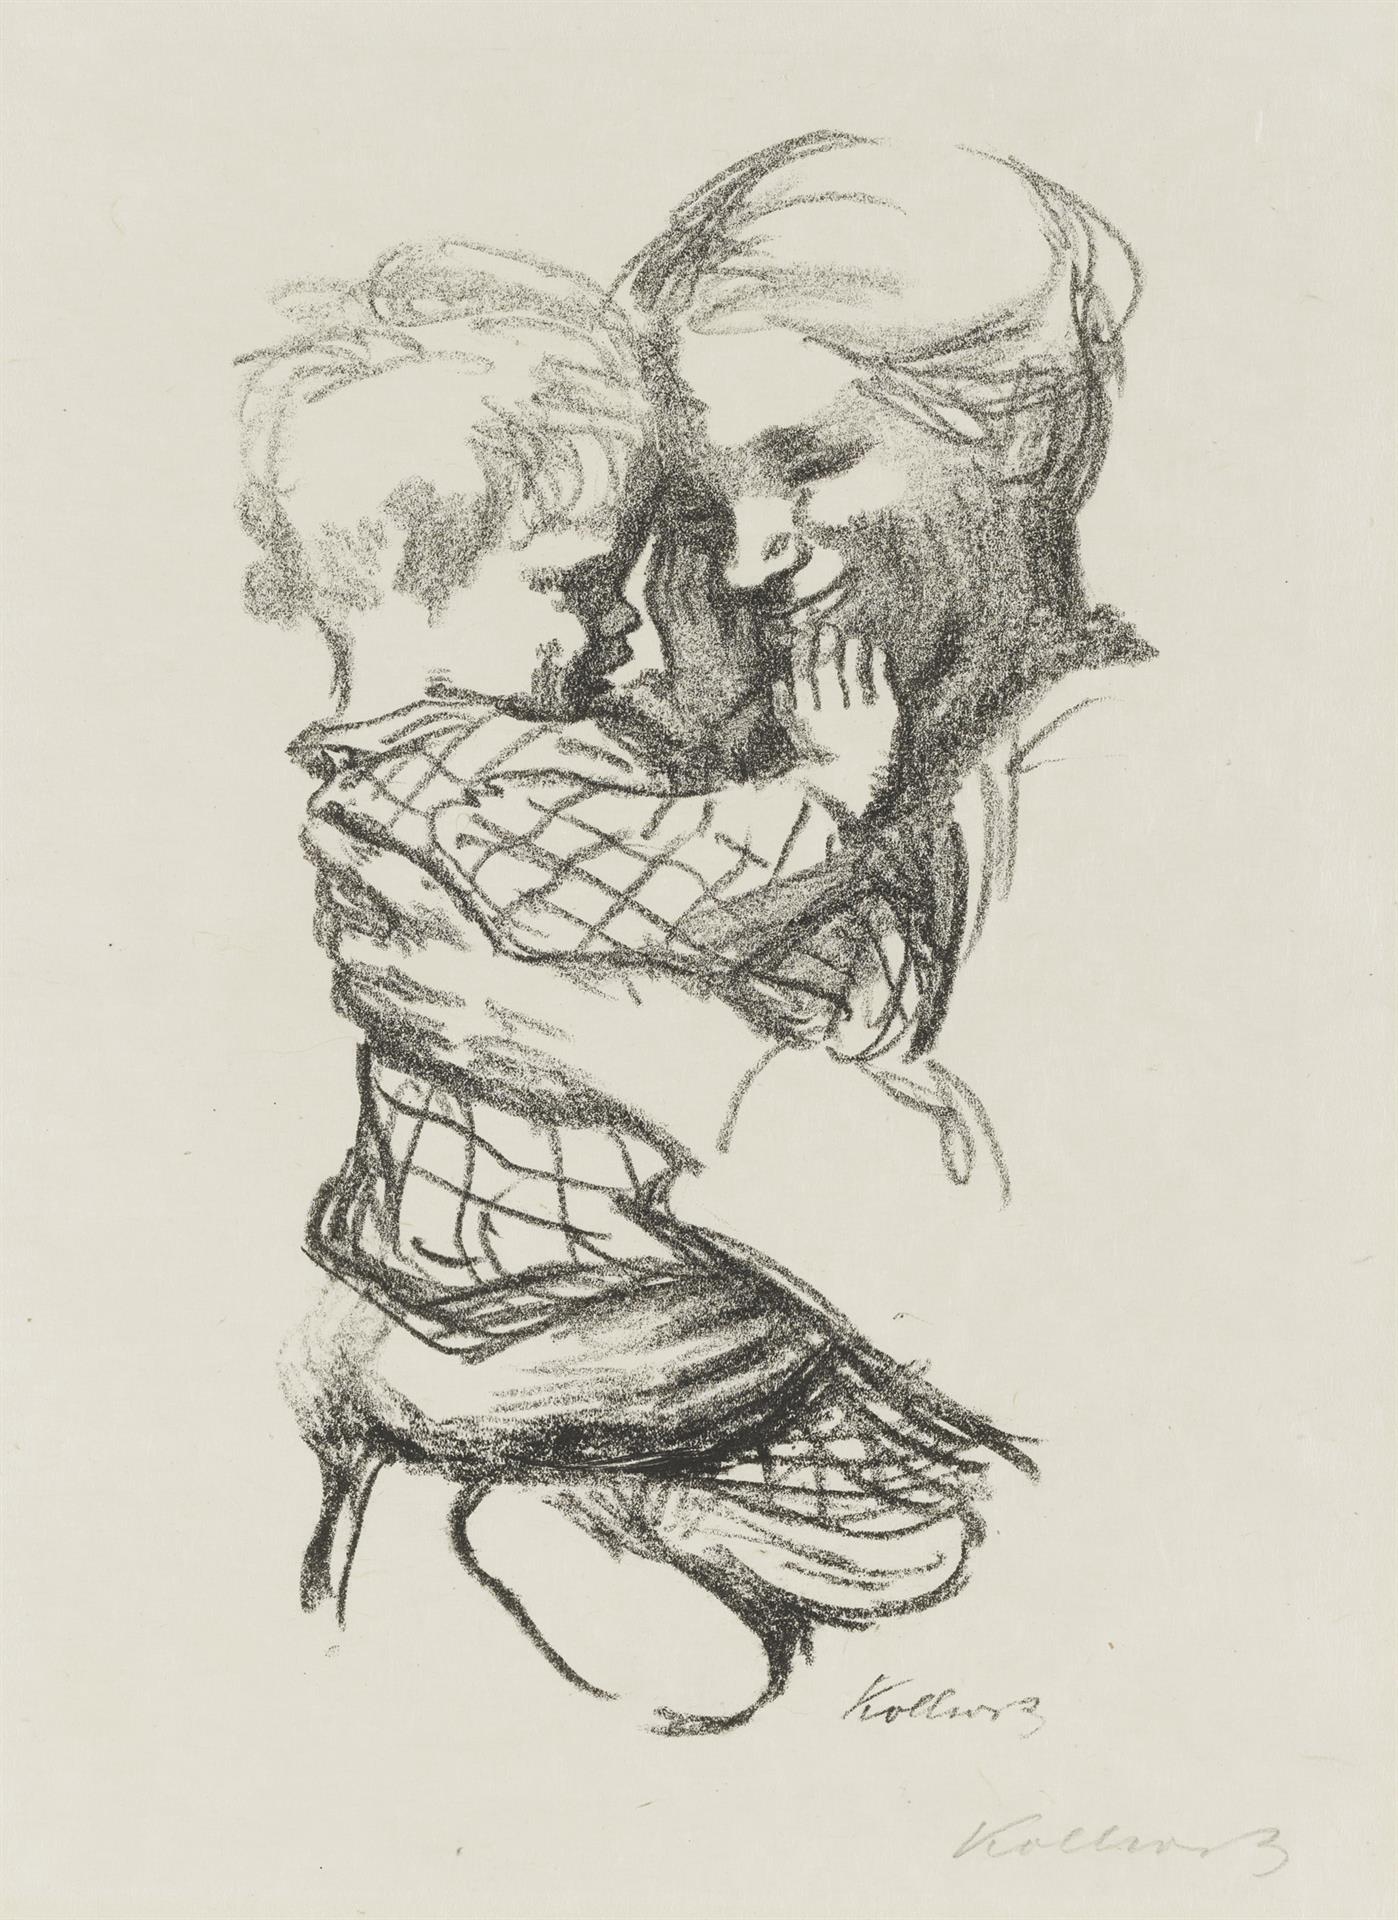 Käthe Kollwitz, Mother with a Child in her Arms, final version, 1916, crayon lithograph (transfer), Kn 136 A II, Cologne Kollwitz Collection © Käthe Kollwitz Museum Köln